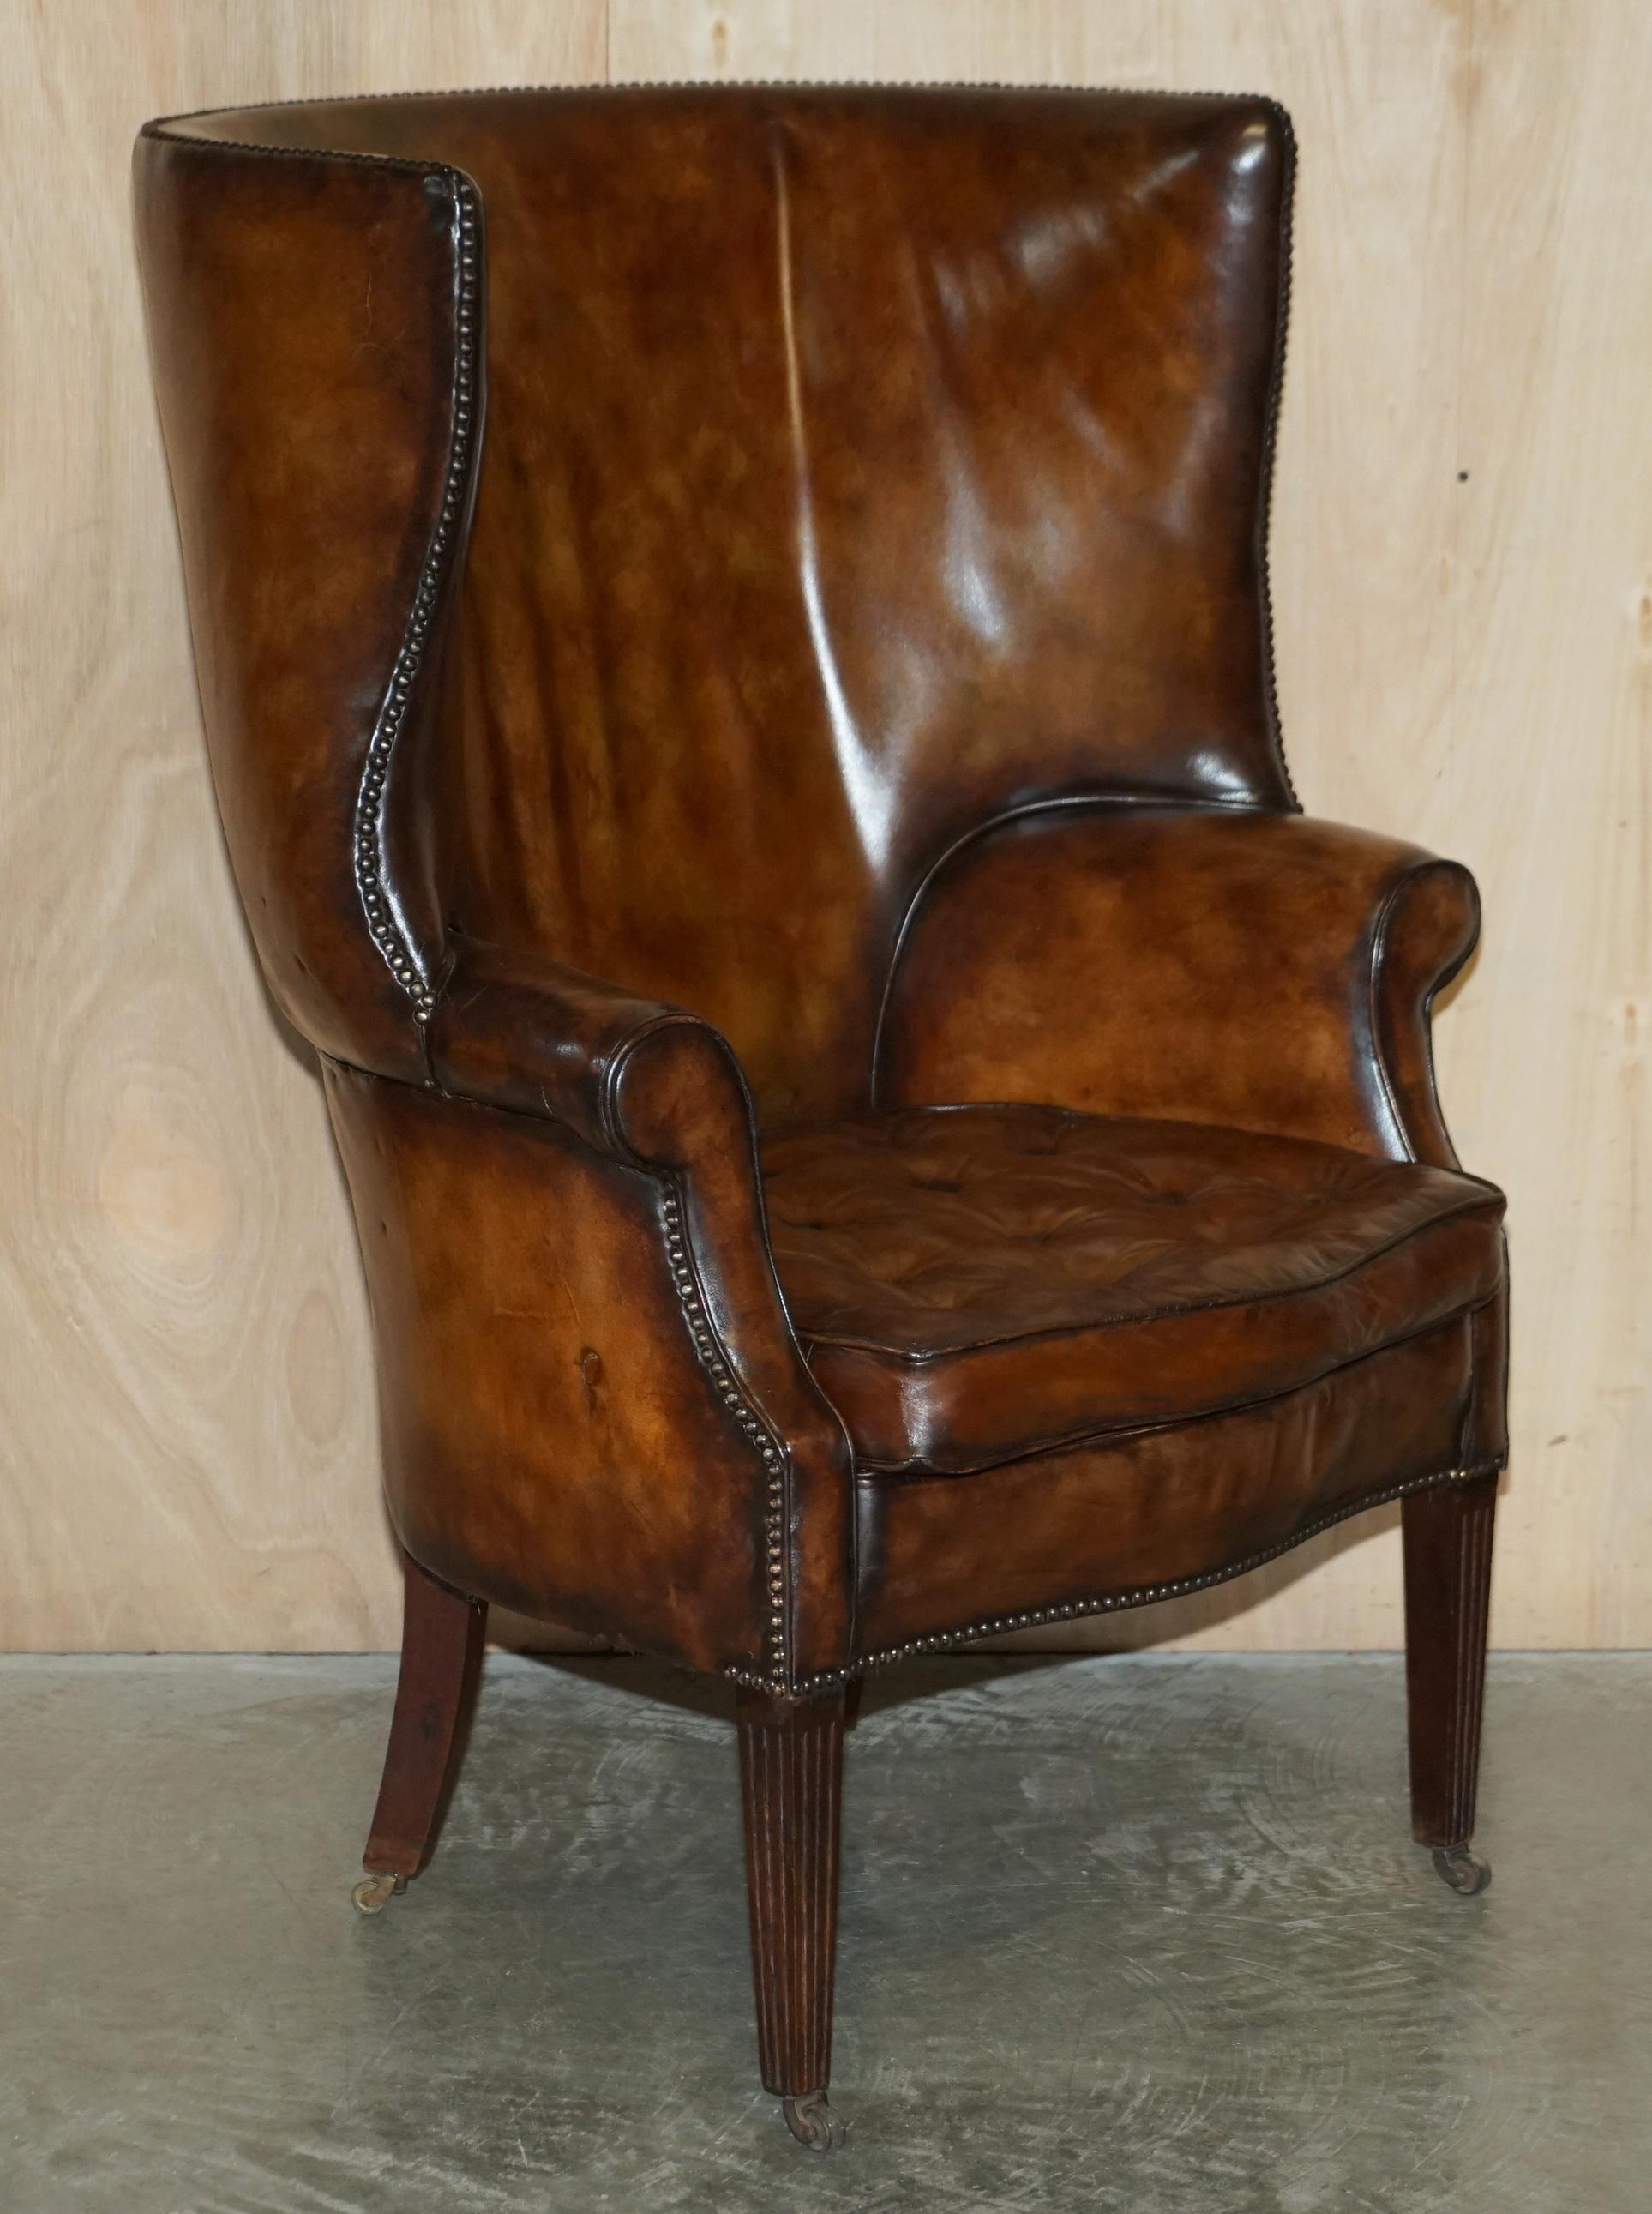 We are delighted to offer for sale this pair of stunning mid Victorian circa 1860 fully restored Porters barrel back armchairs in whisky brown leather with Thomas Chippendale floating button cushions 

These chairs are a real tour de force, they